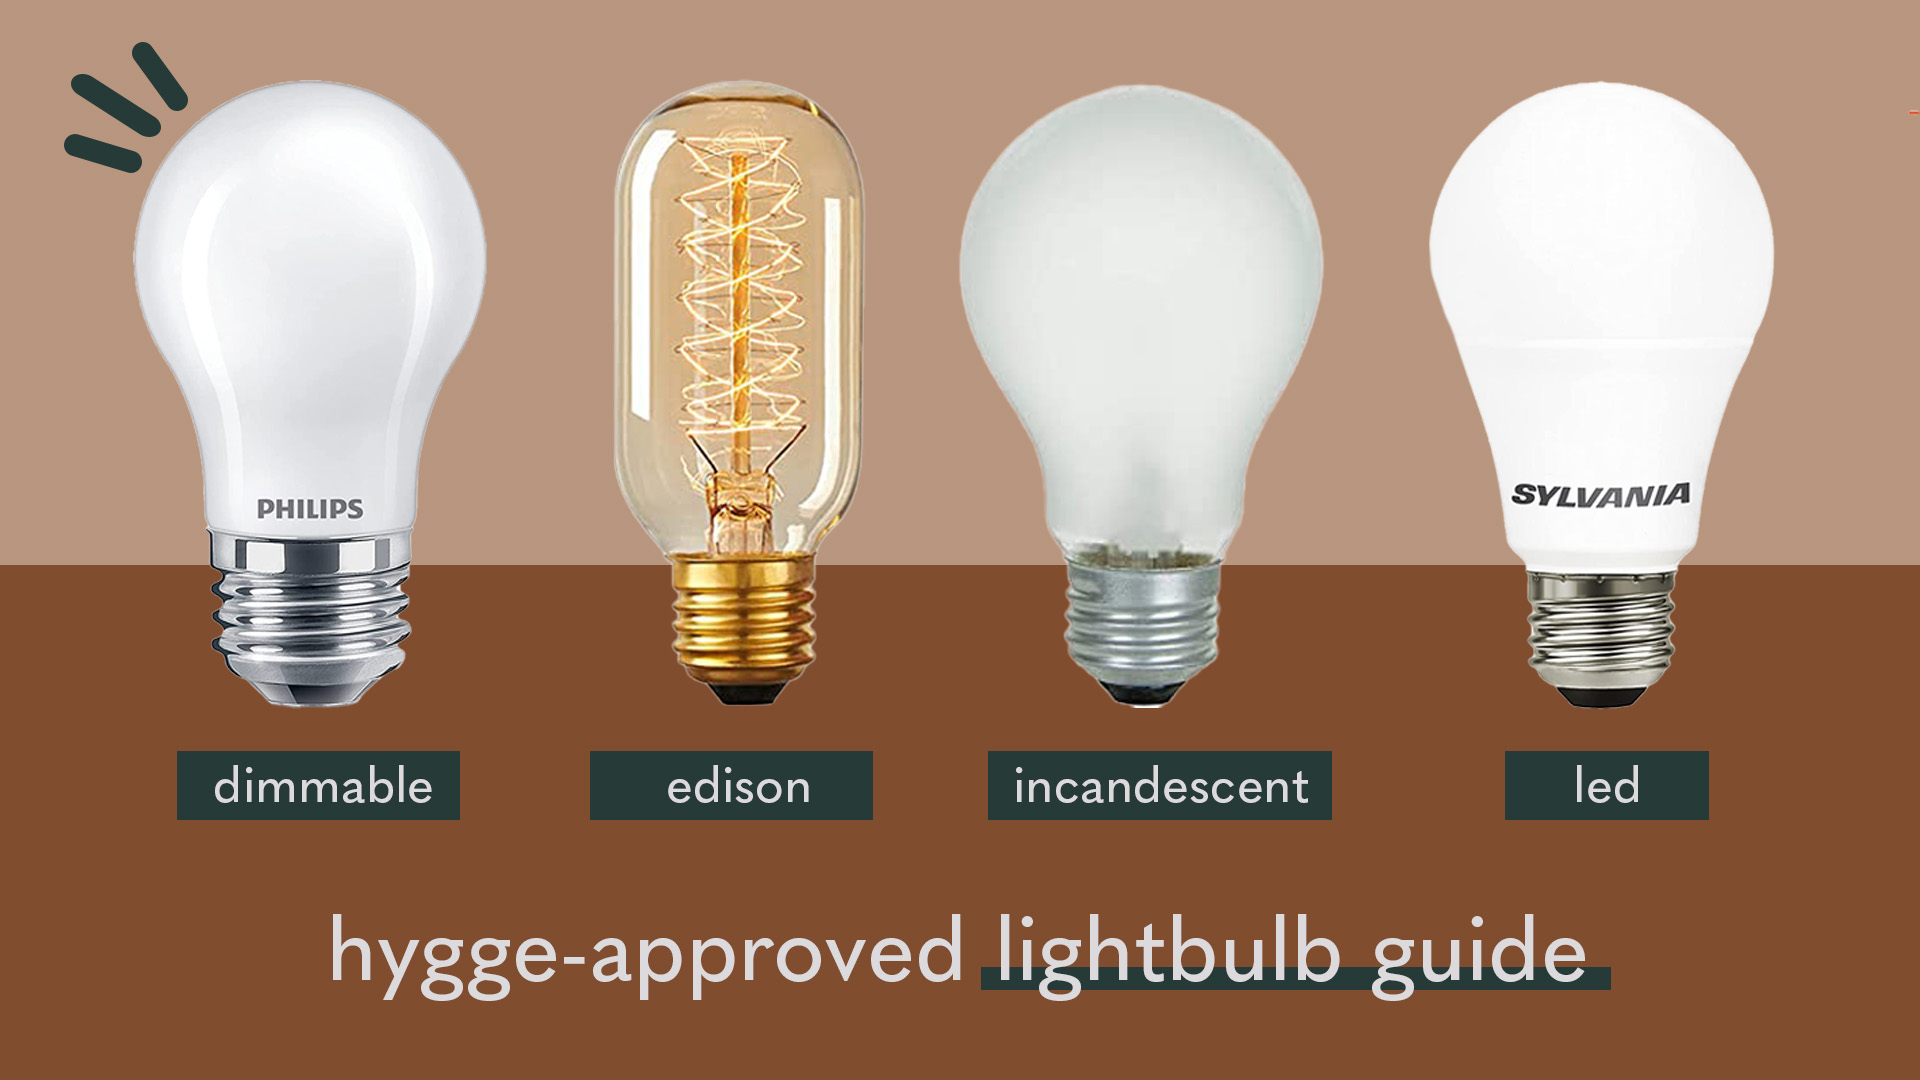 Philips LED Bulbs: Energy-Efficient and Dimmable Bulbs for home